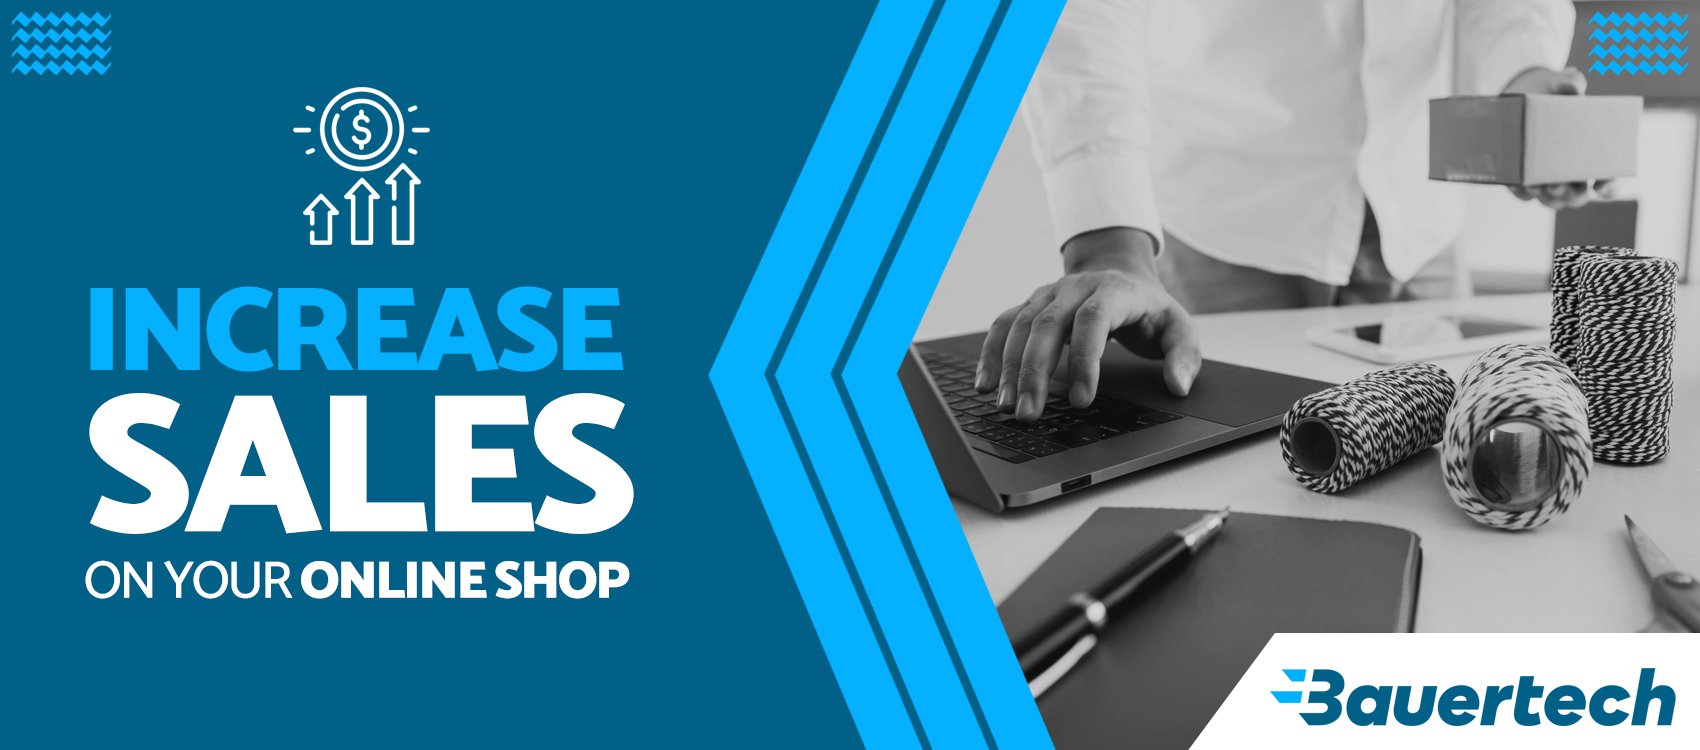 increase sales on your online shop